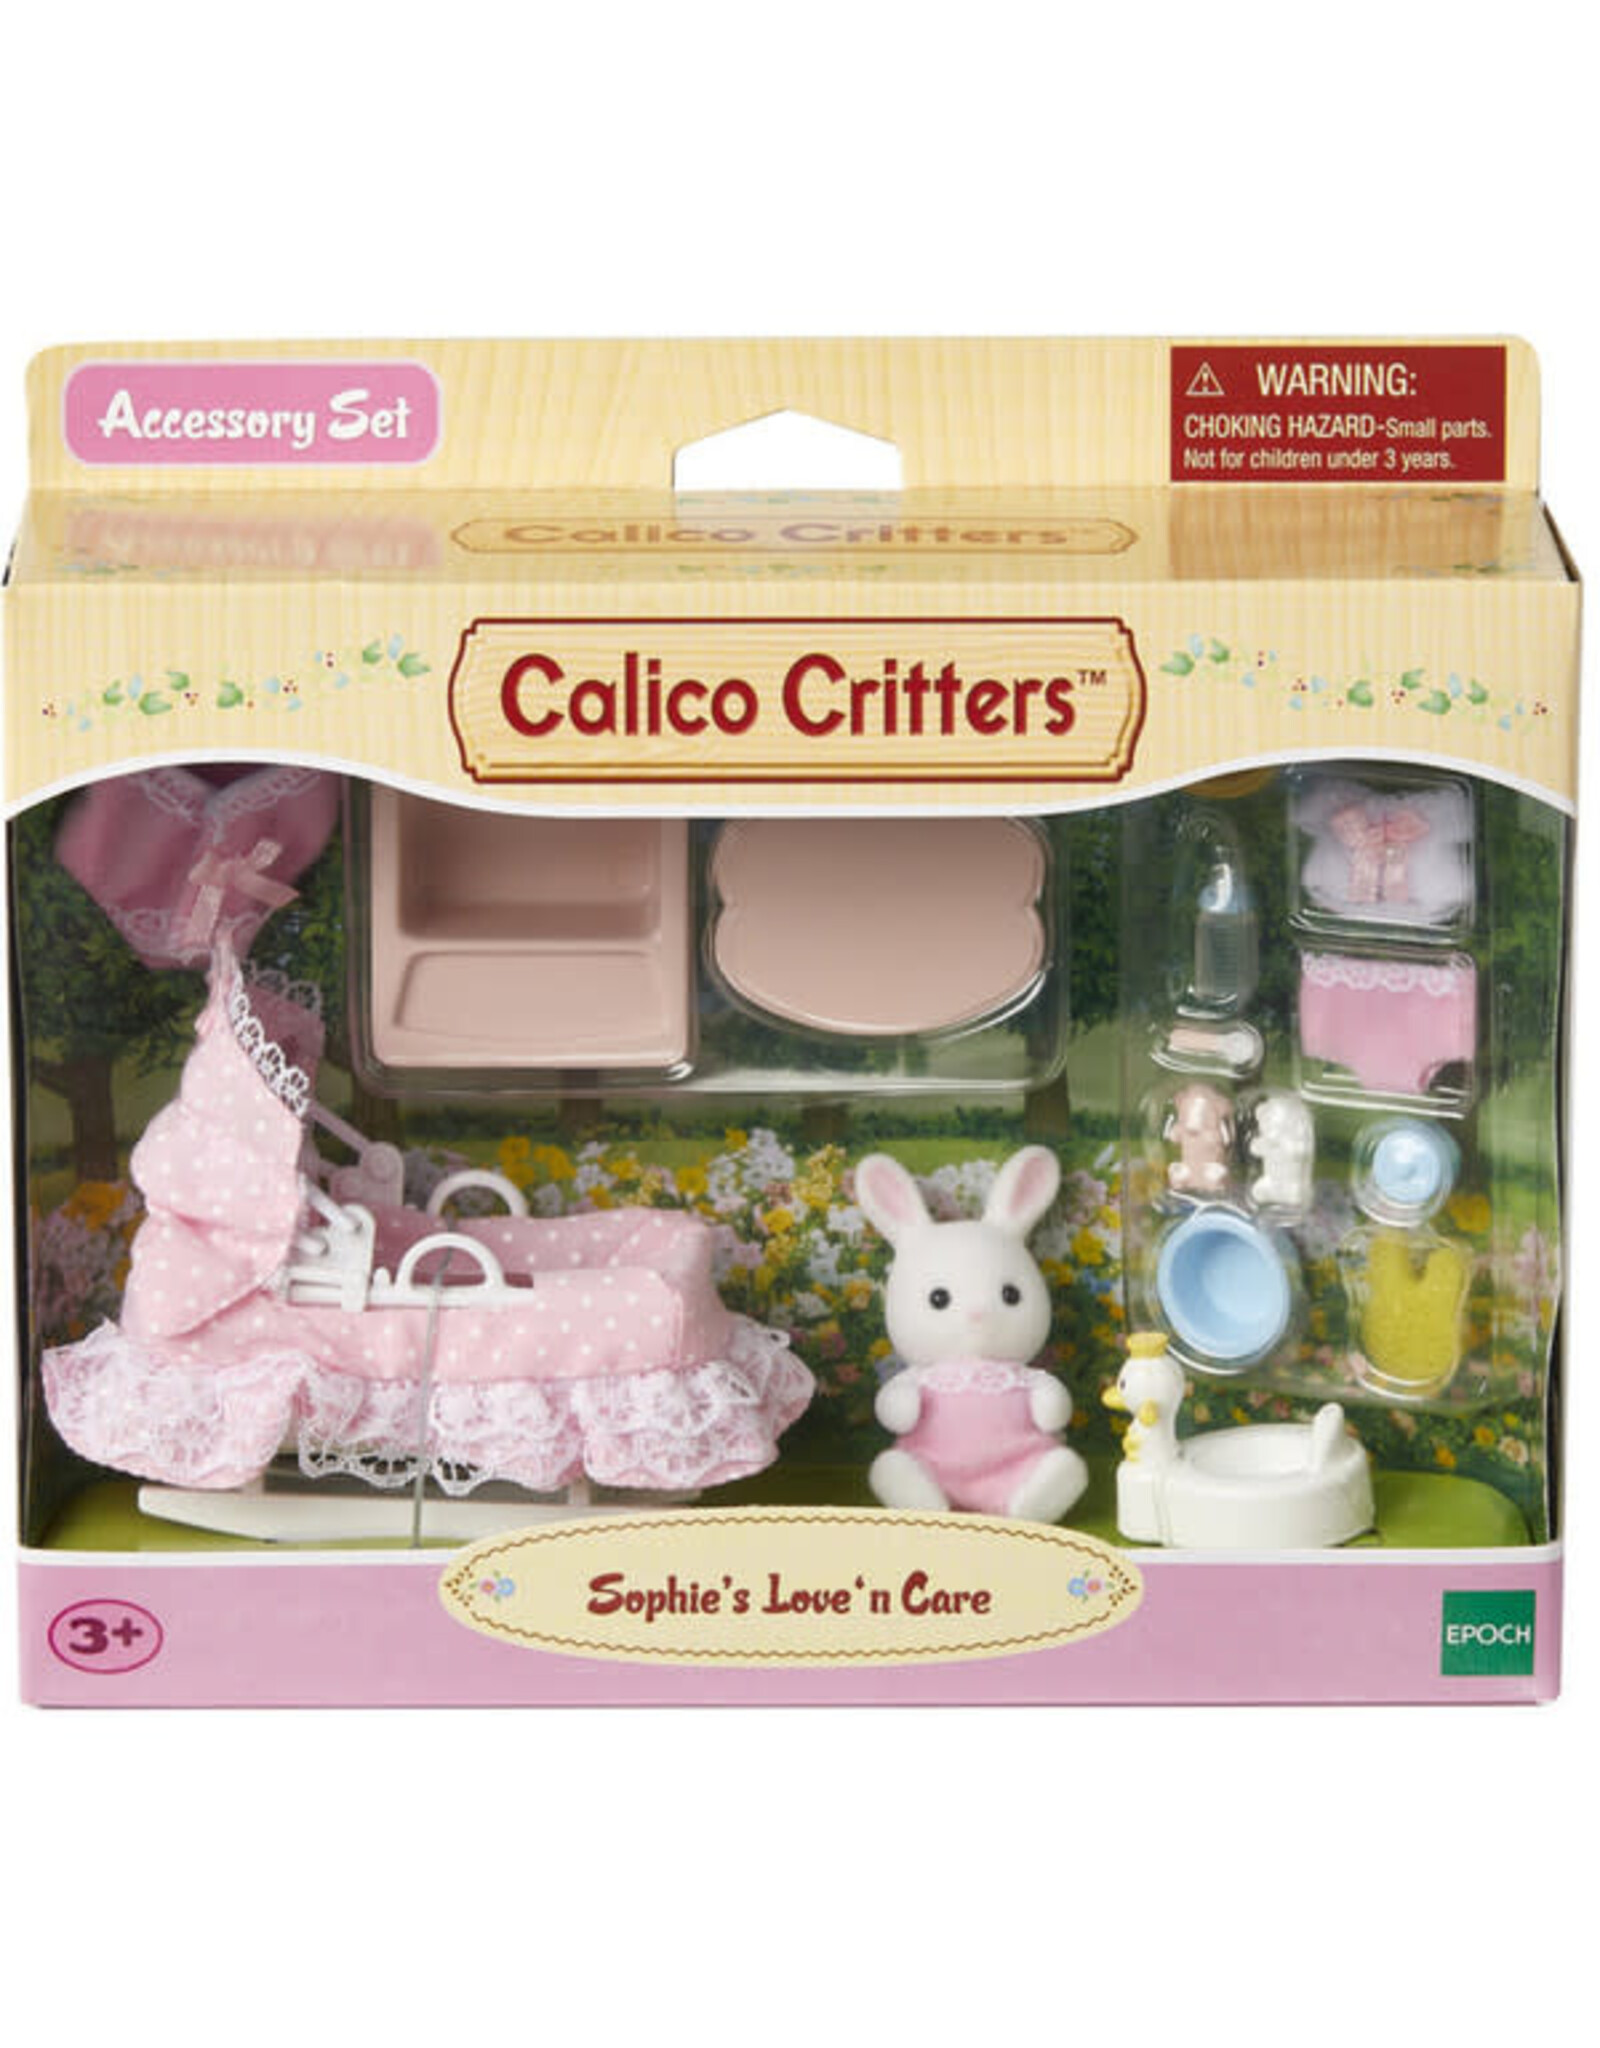 Calico Critters: Sophie's Love'n Care